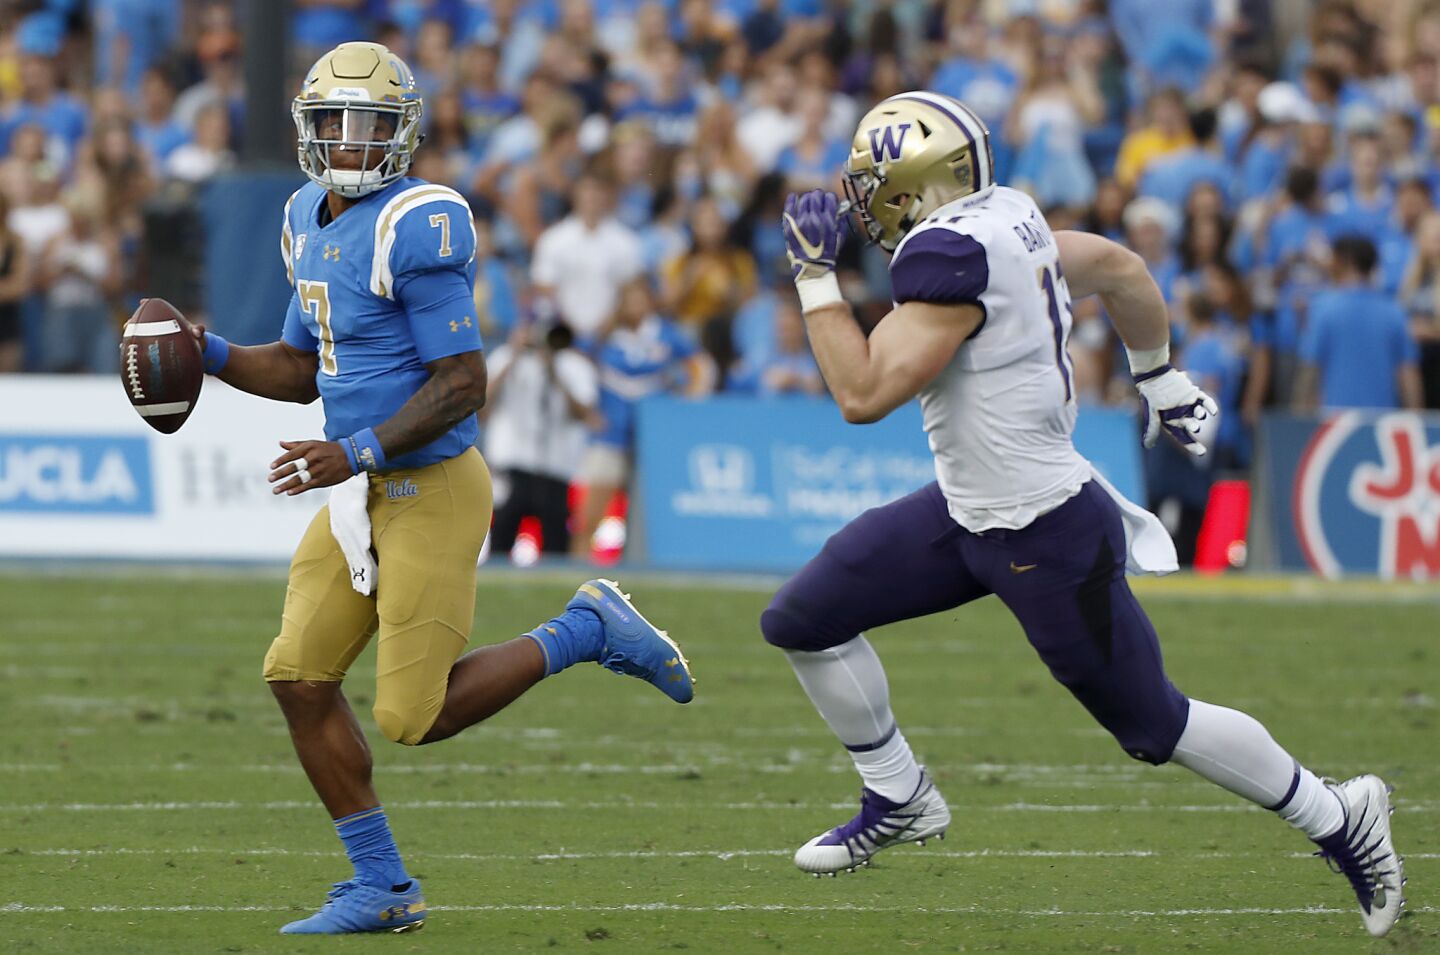 UCLA quarterback Dorian Thompson-Robinson is flushed out of the pocket by Washington linebacker Tevis Bartlett in the second quarter on Saturday at the Rose Bowl.